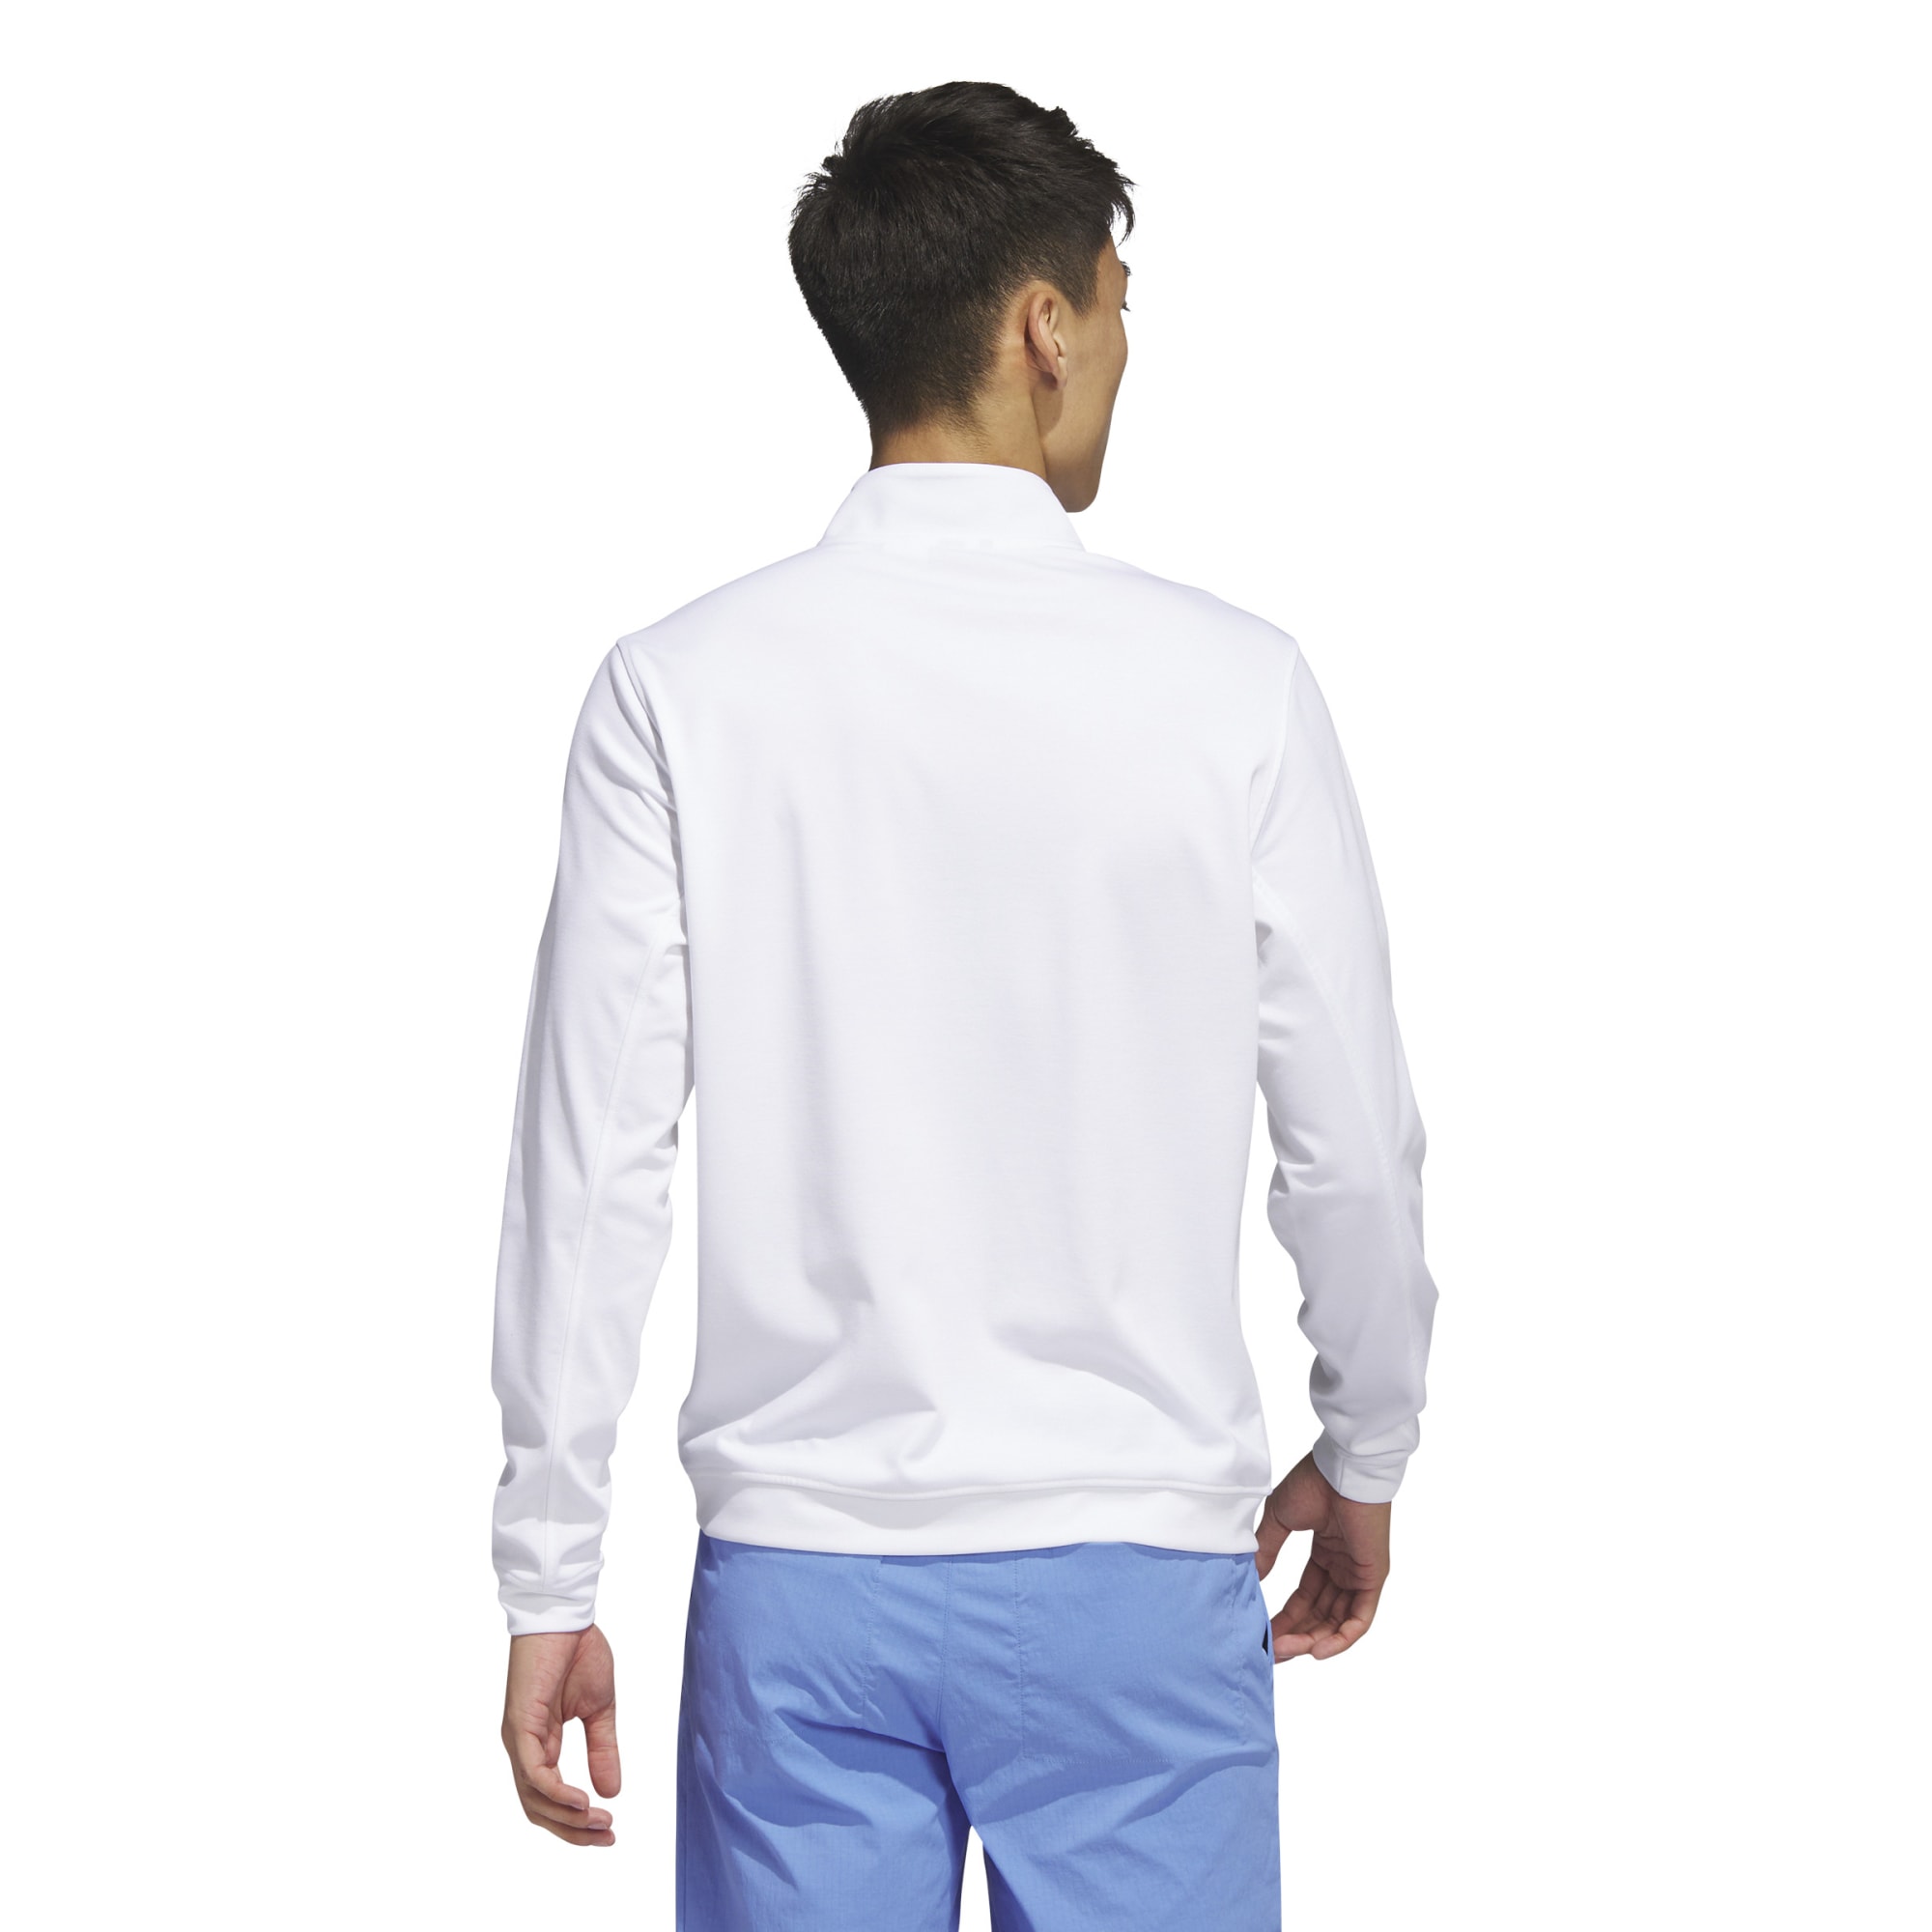 adidas Golf Elevated 1/4 Zip Pullover  - White